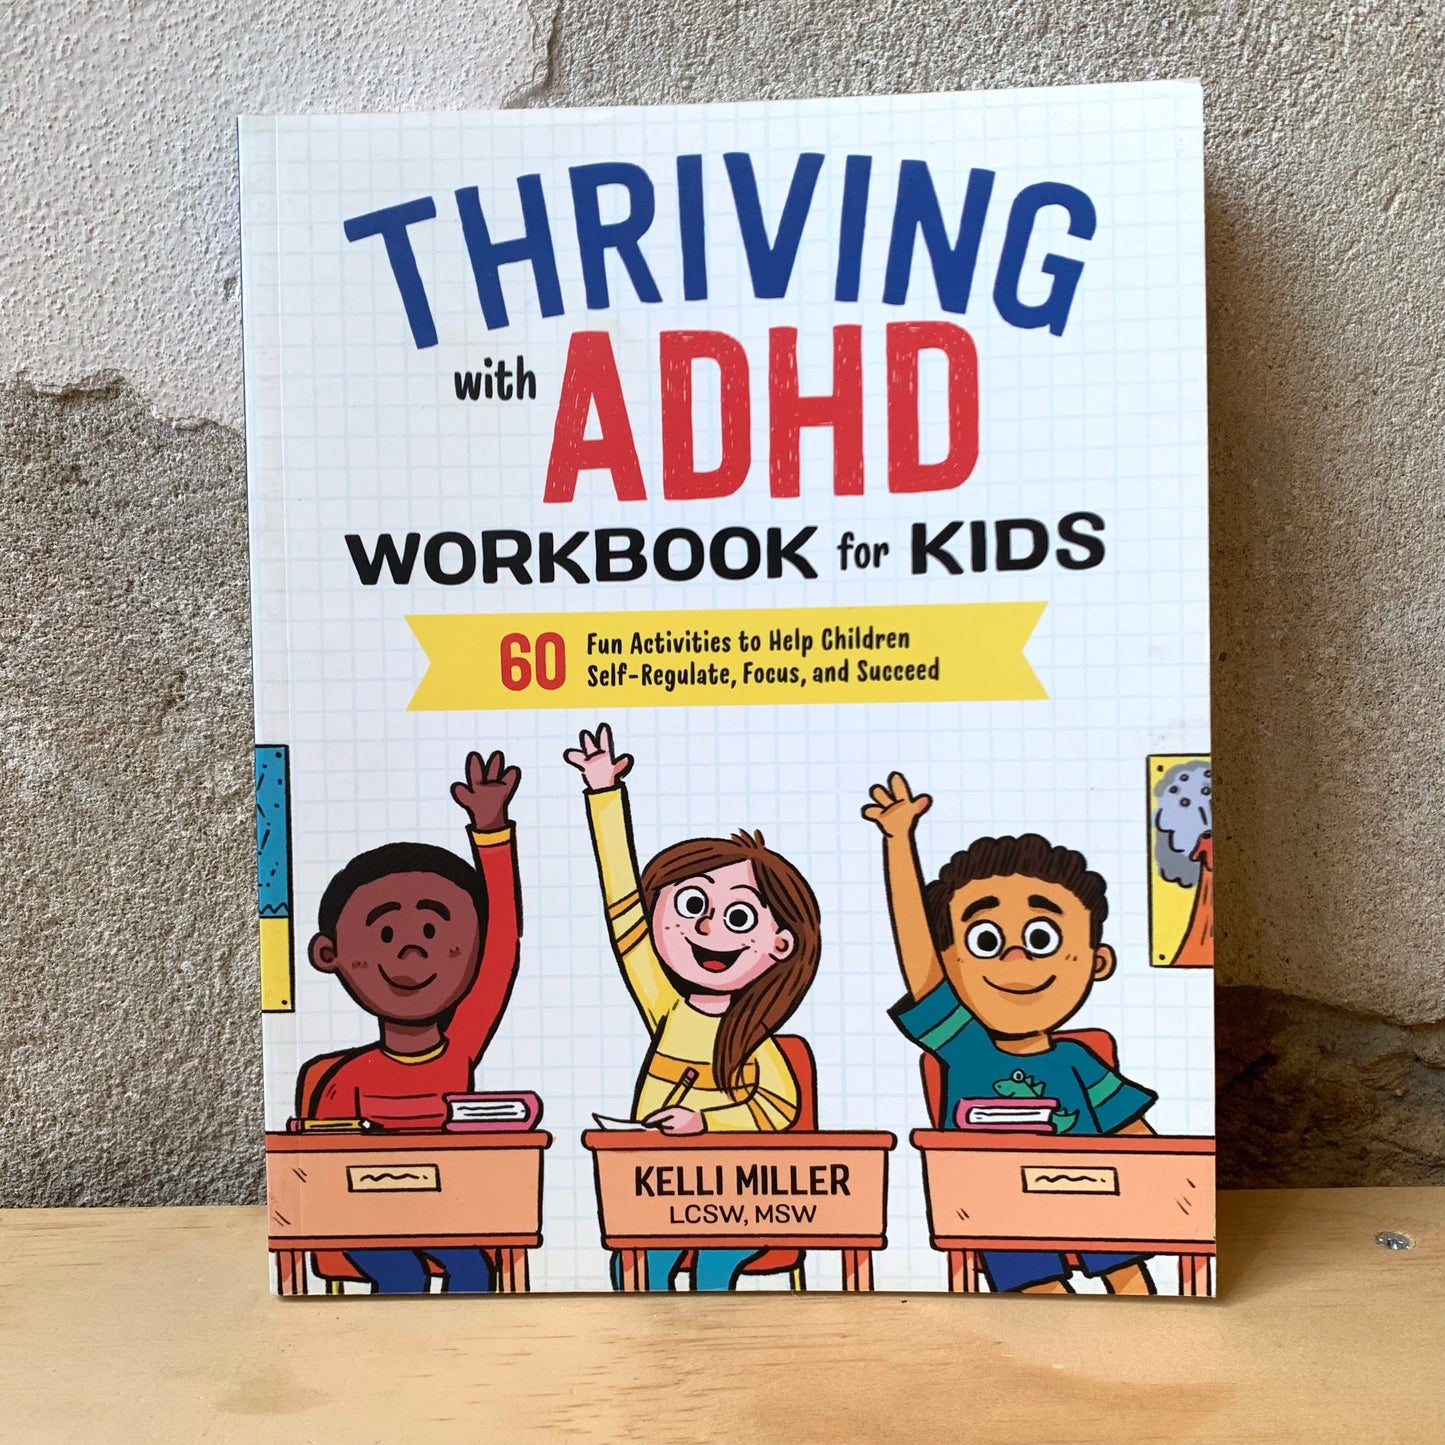 Thriving with ADHD Workbook for Kids: 60 Fun Activities to Help Children Self-Regulate, Focus, and Succeed – Kelli Miller